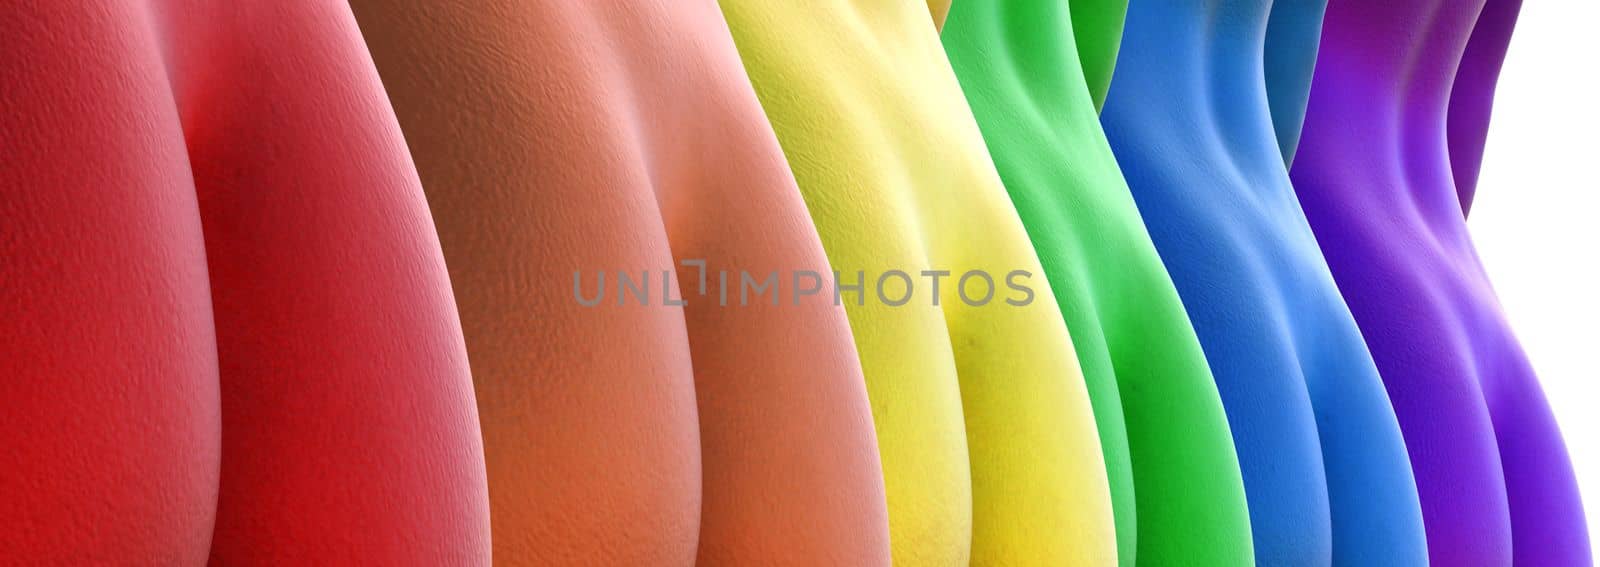 3d illustration. Close-up of multicolored naked female buttocks. Rainbow. metal. by mrwed54